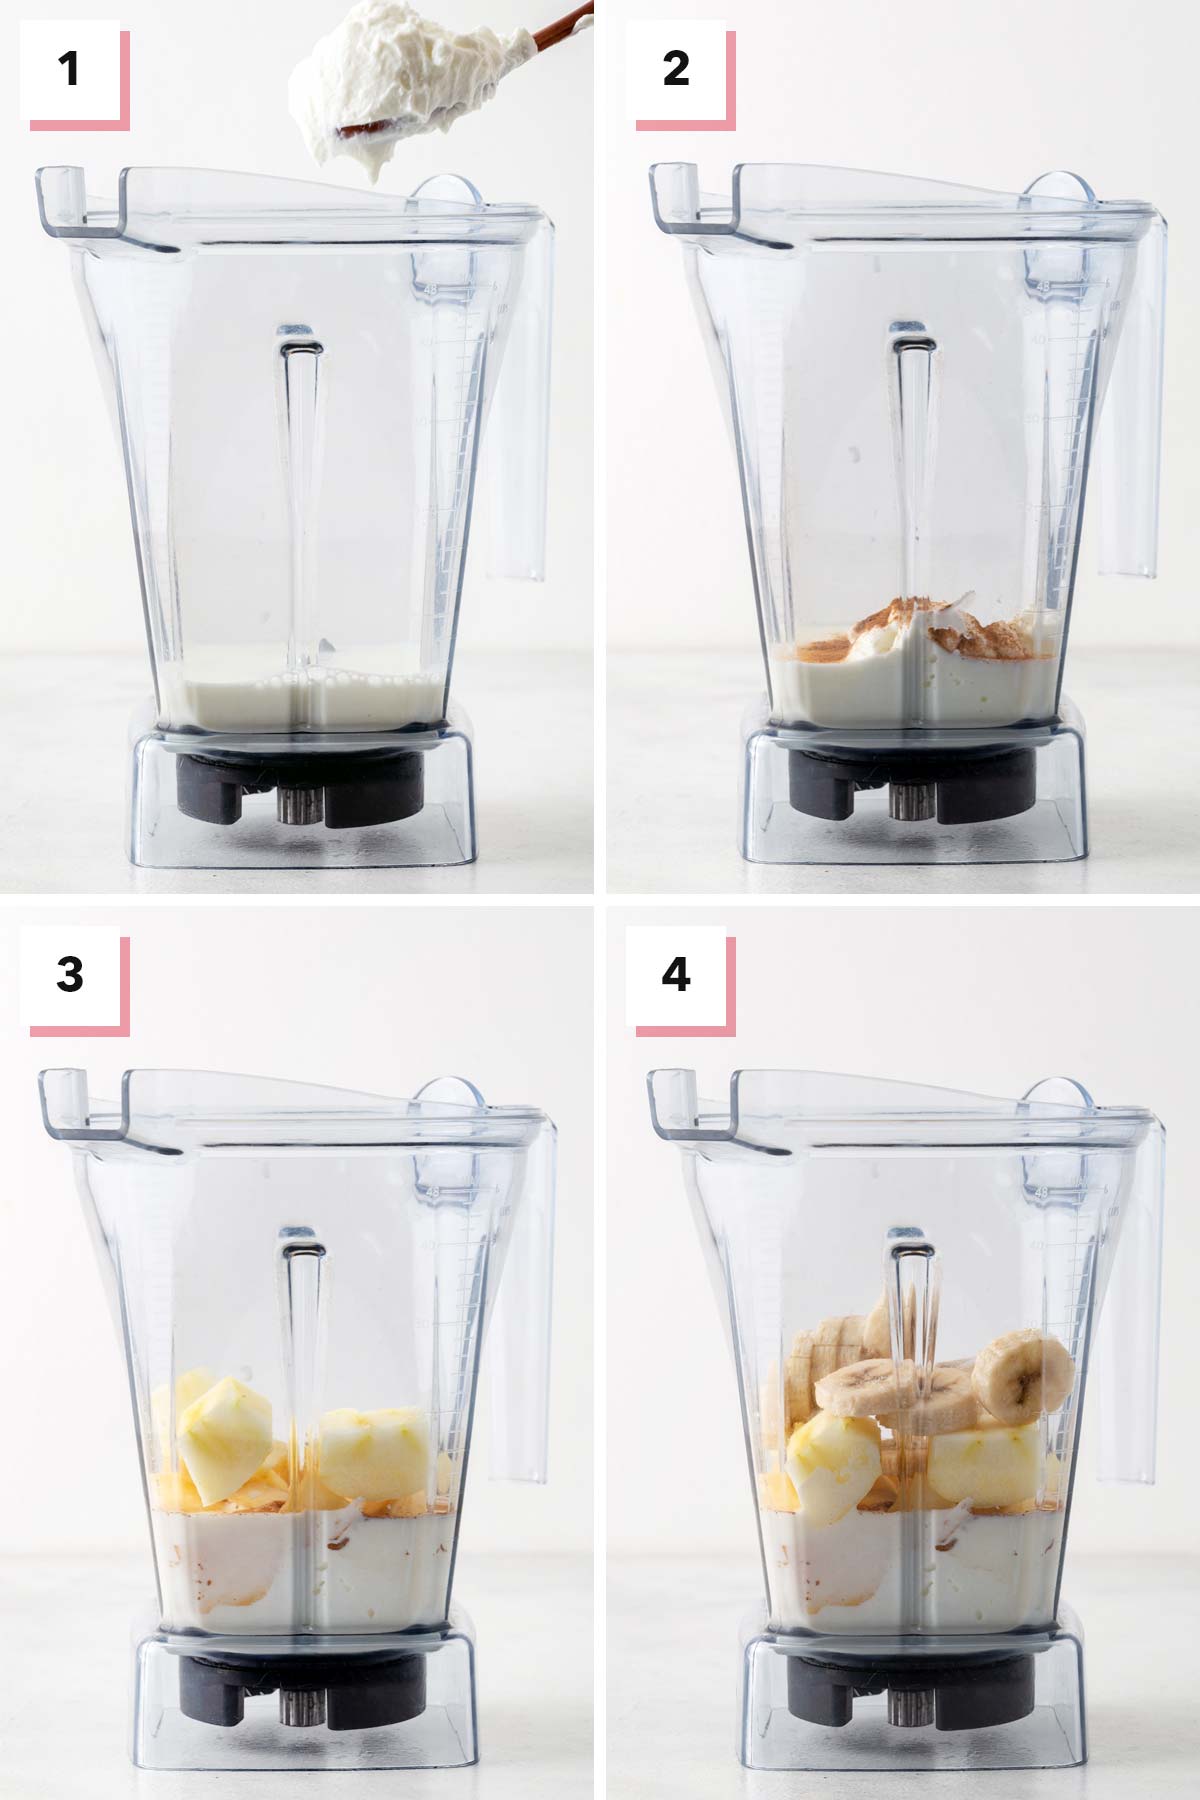 Steps for making an apple smoothie.